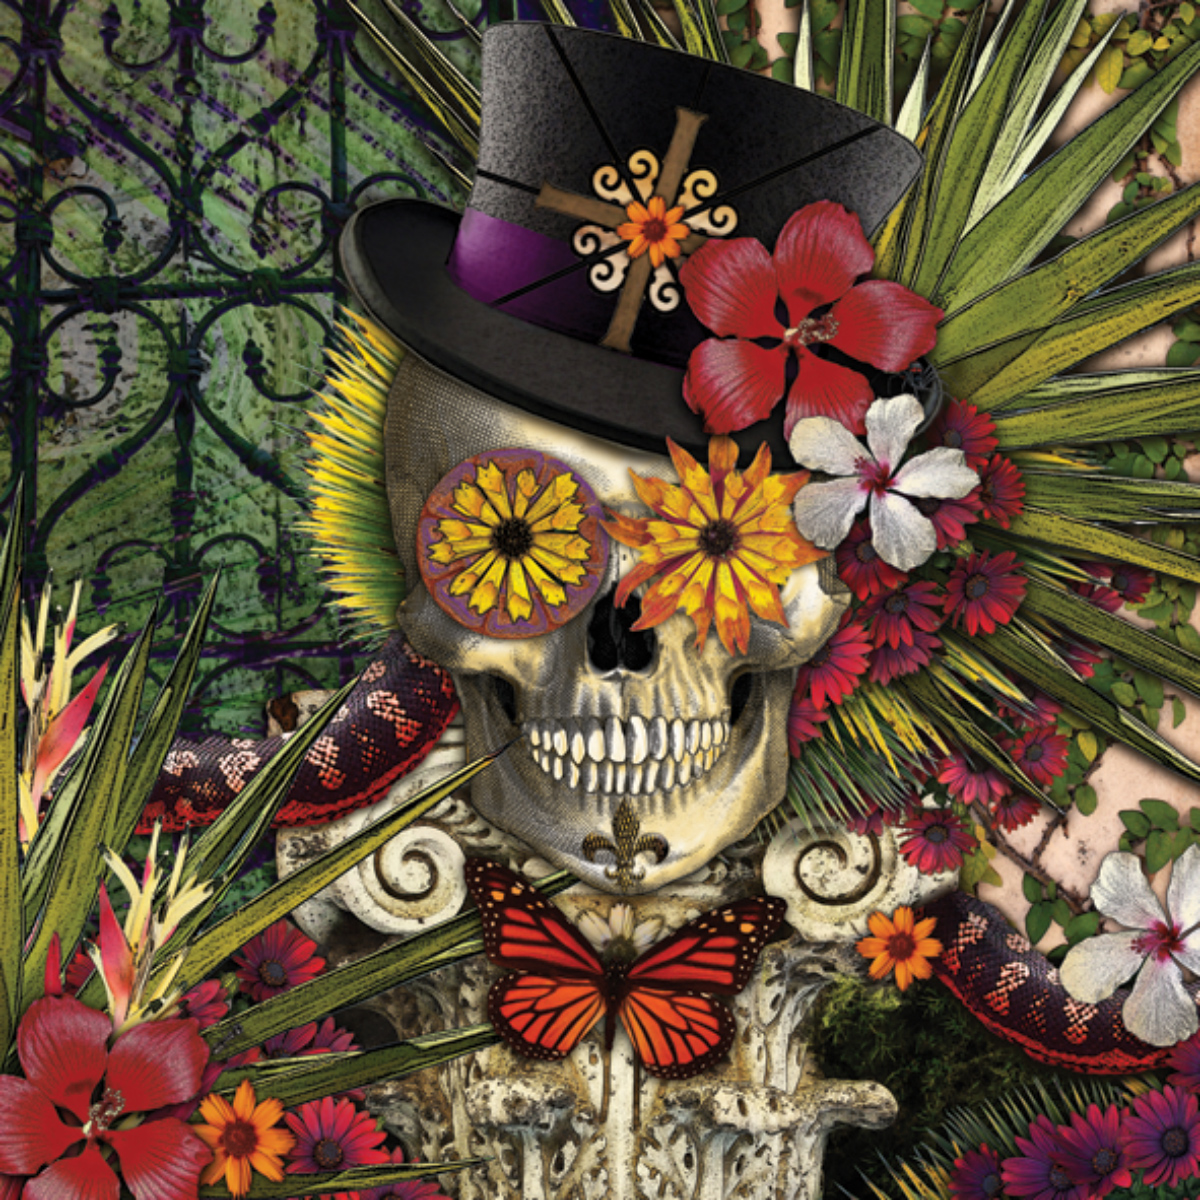 Baron in Bloom - Scratch and Dent Gothic Art Jigsaw Puzzle